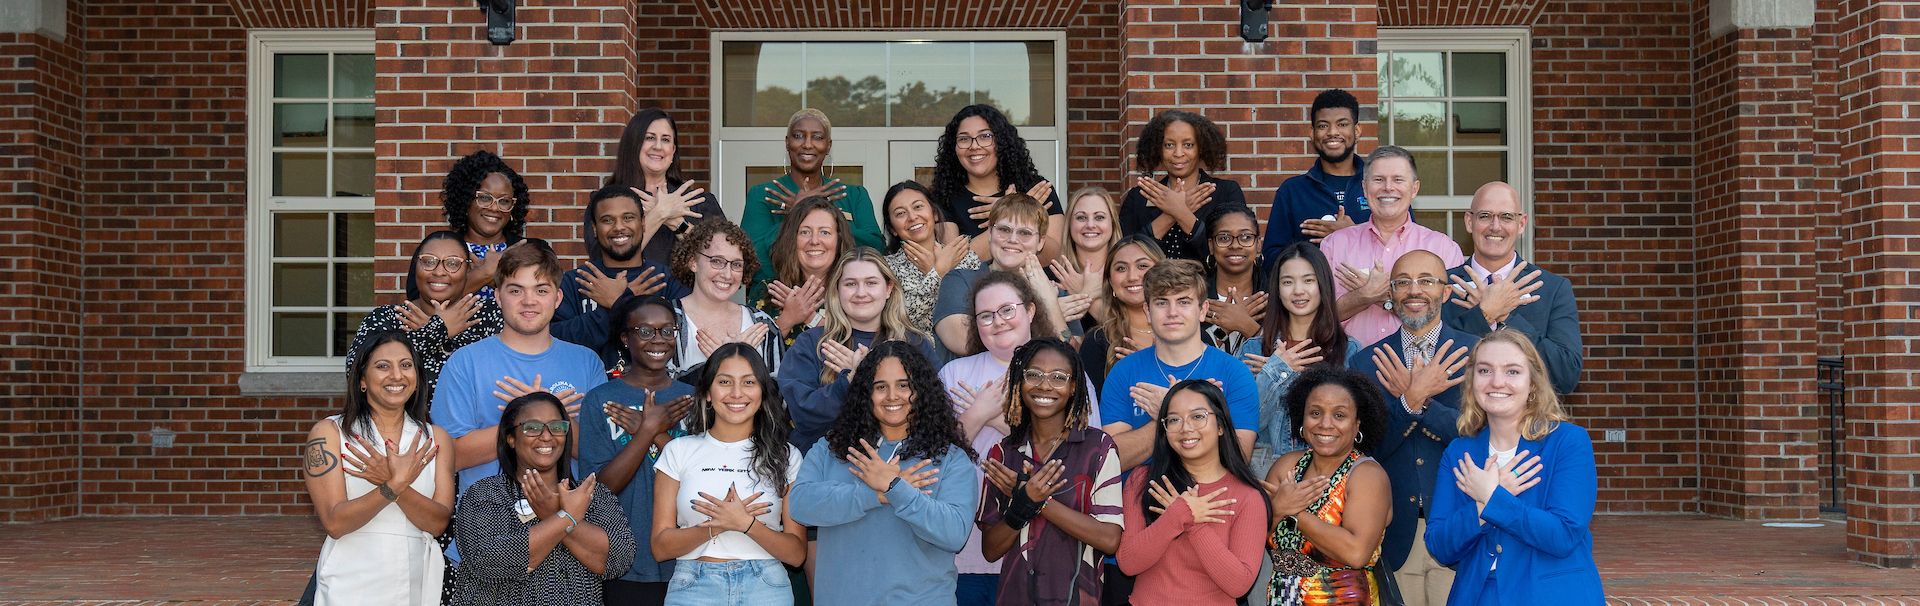 First generation students posing together for National First Generation Day